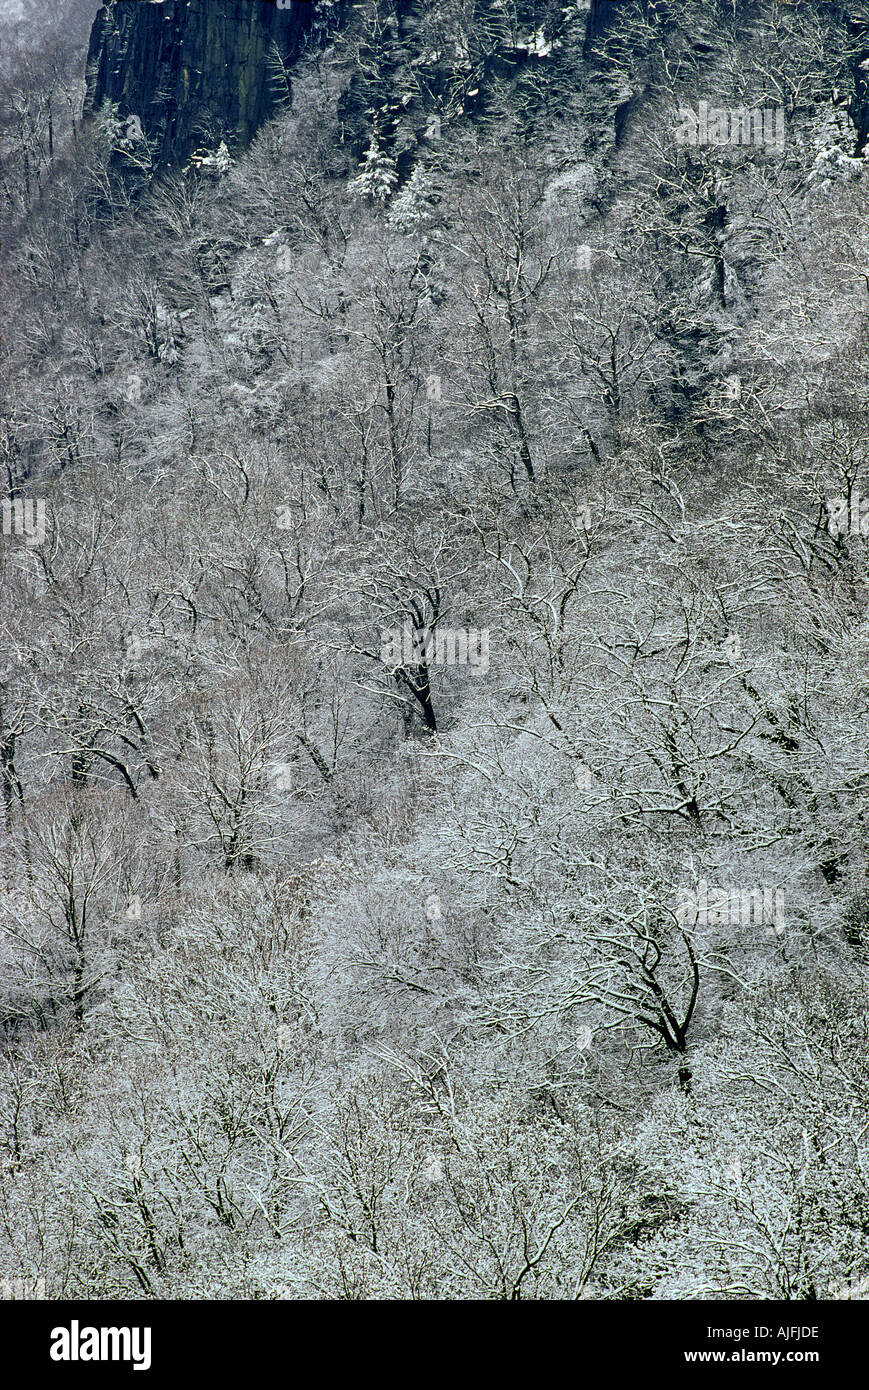 Trees Covered in Snow on the Palisades New Jersey Stock Photo